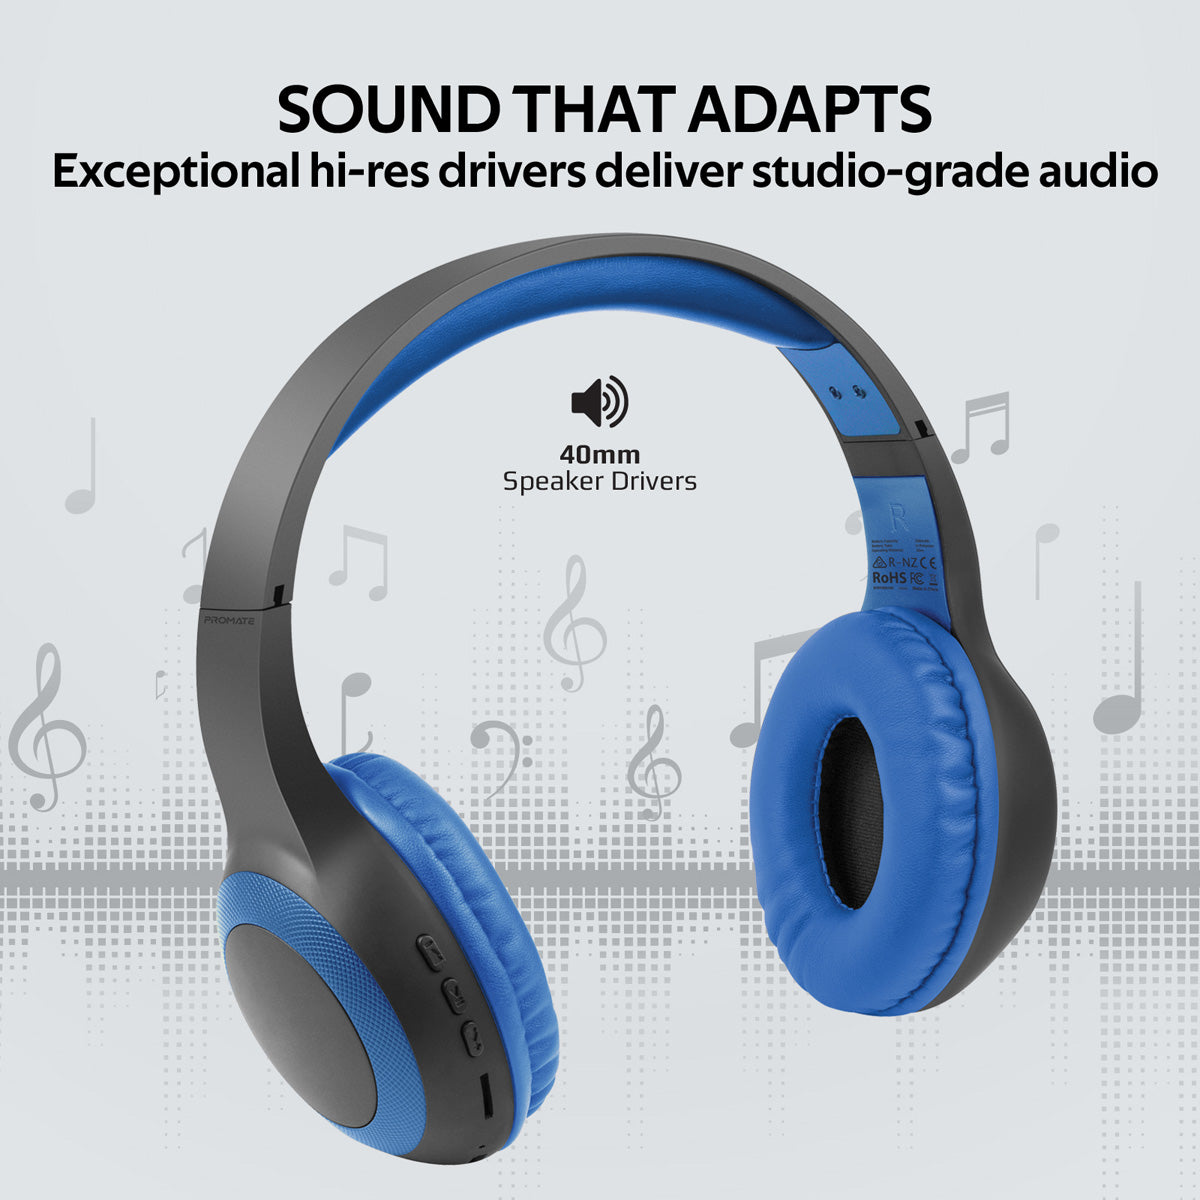 Promate - Bluetooth Headphone, Over-Ear Deep Bass Wired/Wireless Headphone with Long Paytime, Hi-Fi Sound, Built-In Mic, On-Ear Controls, Soft Earpads, MicroSD Card Slot and AUX Port for iPhone, Samsung, iPad Pro, LaBoca Blue